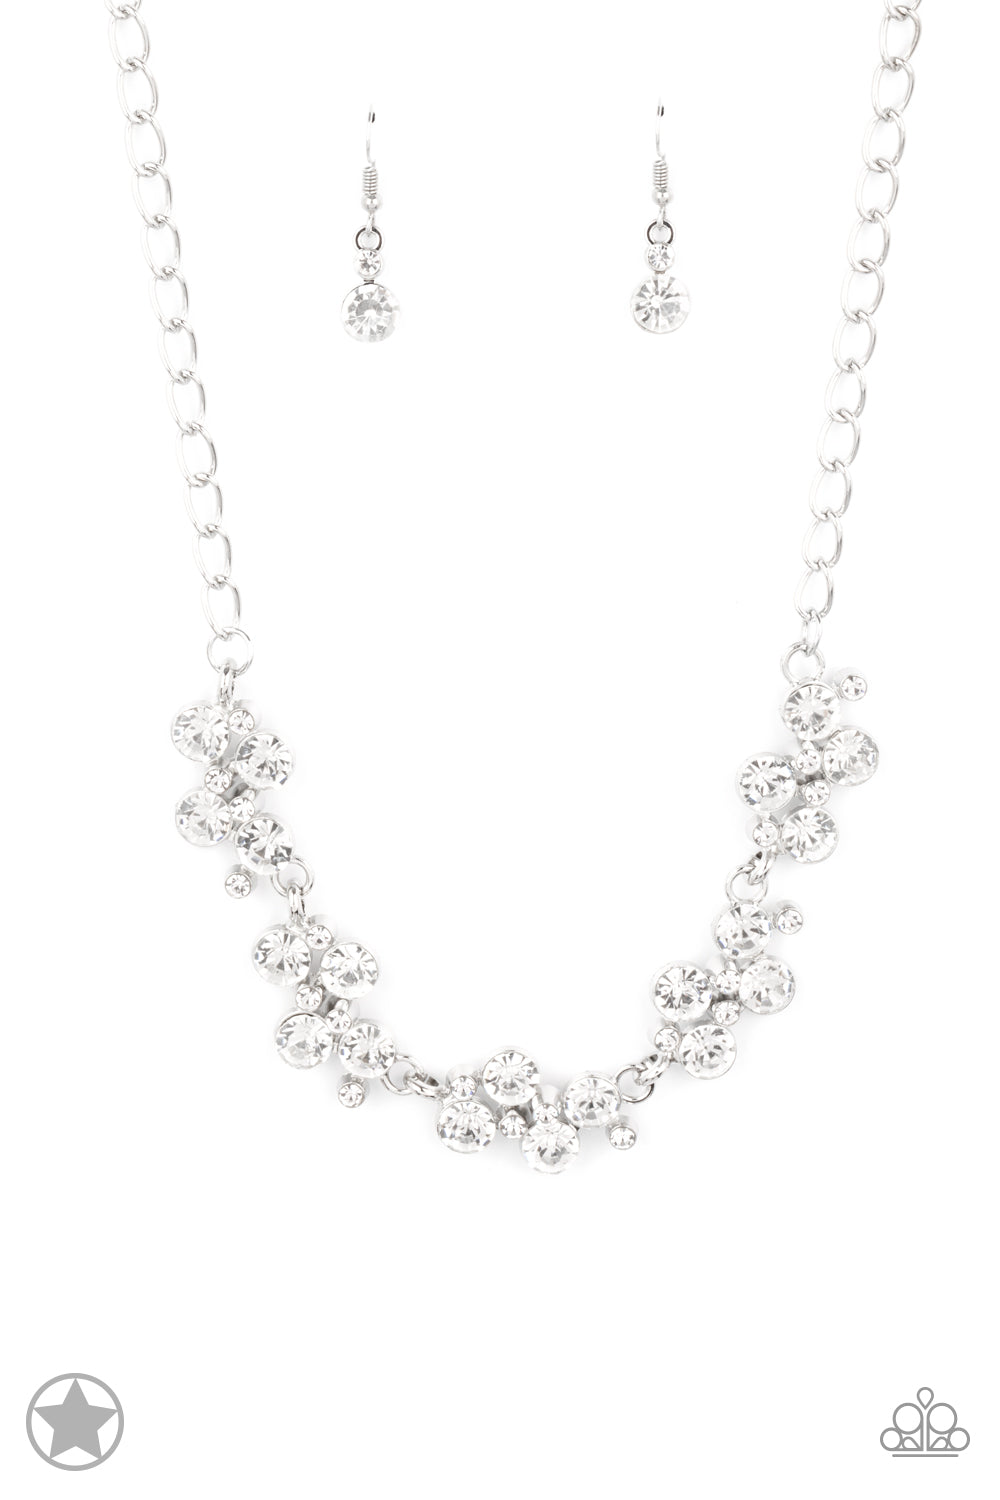 Hollywood Hills White Rhinestone Necklace - Paparazzi Accessories